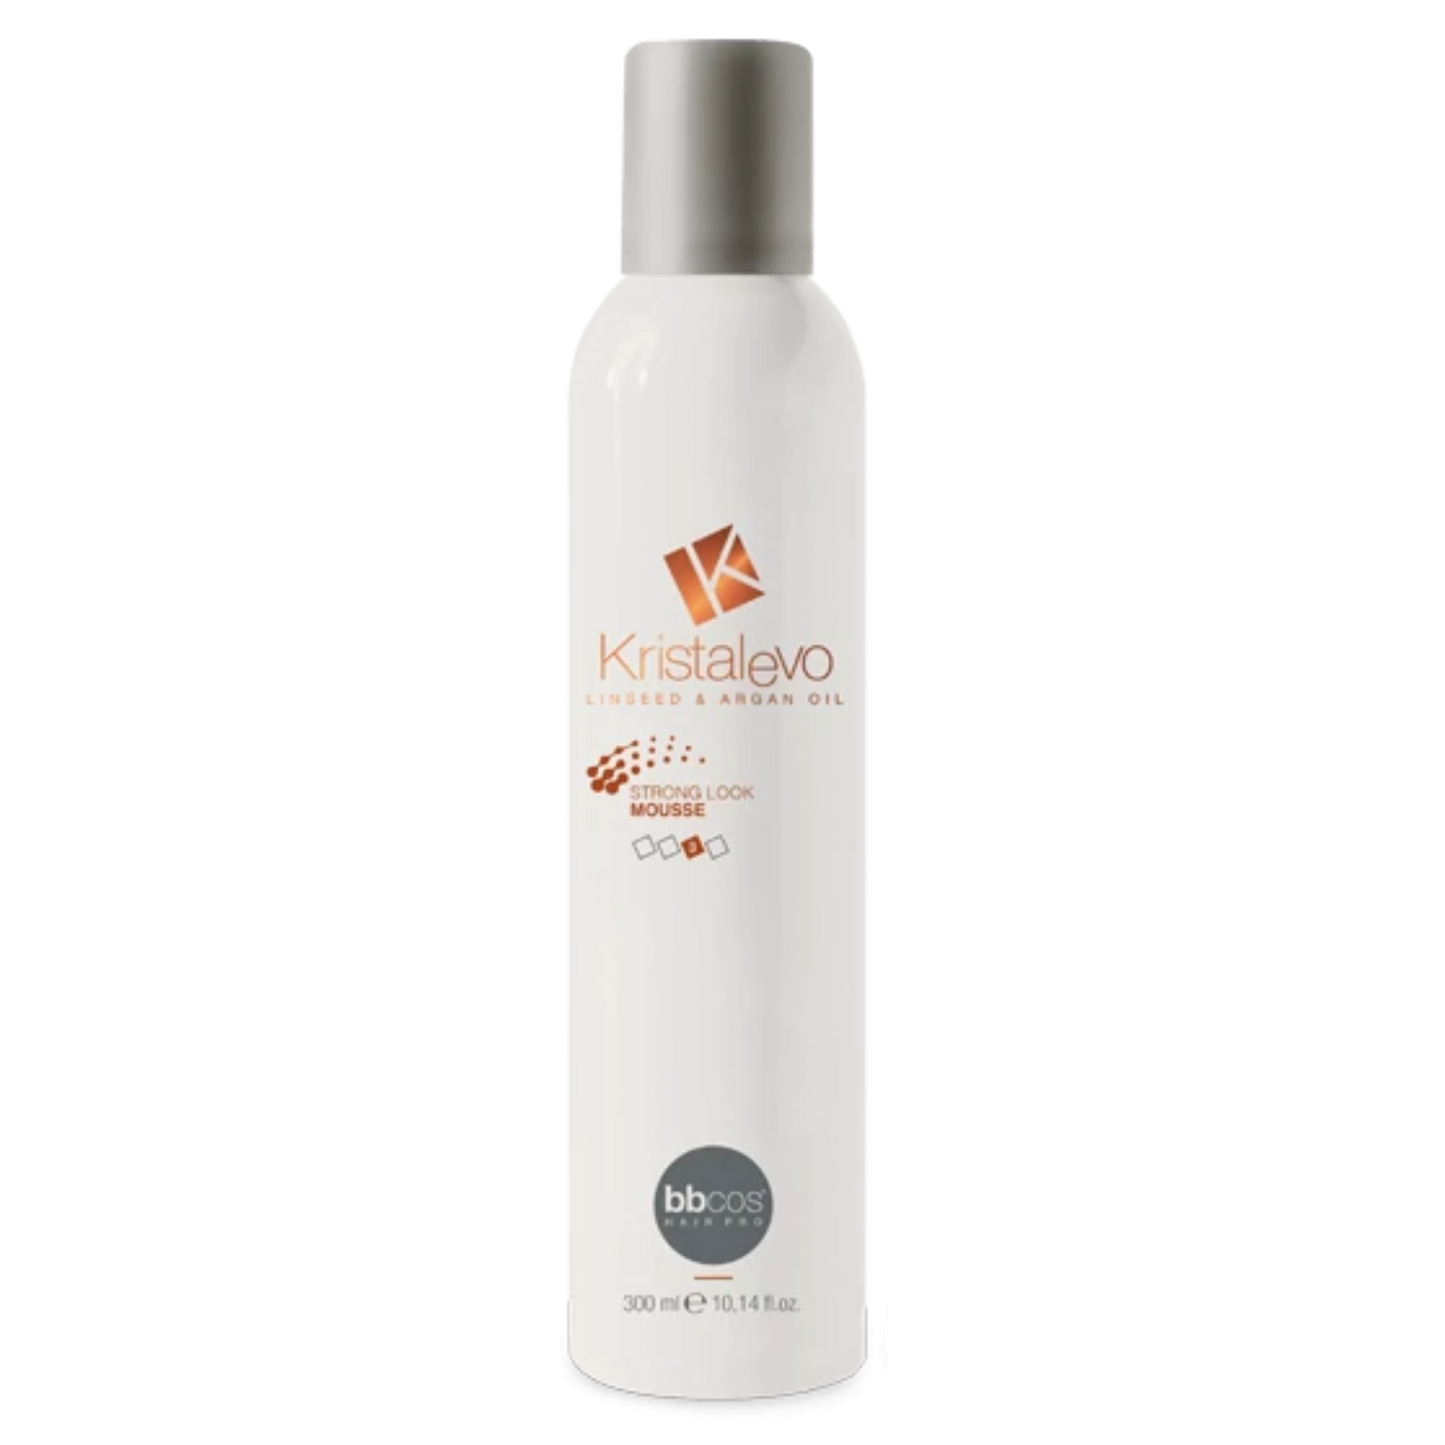 BBCOS Kristal Evo Strong Look Mousse 300 ML